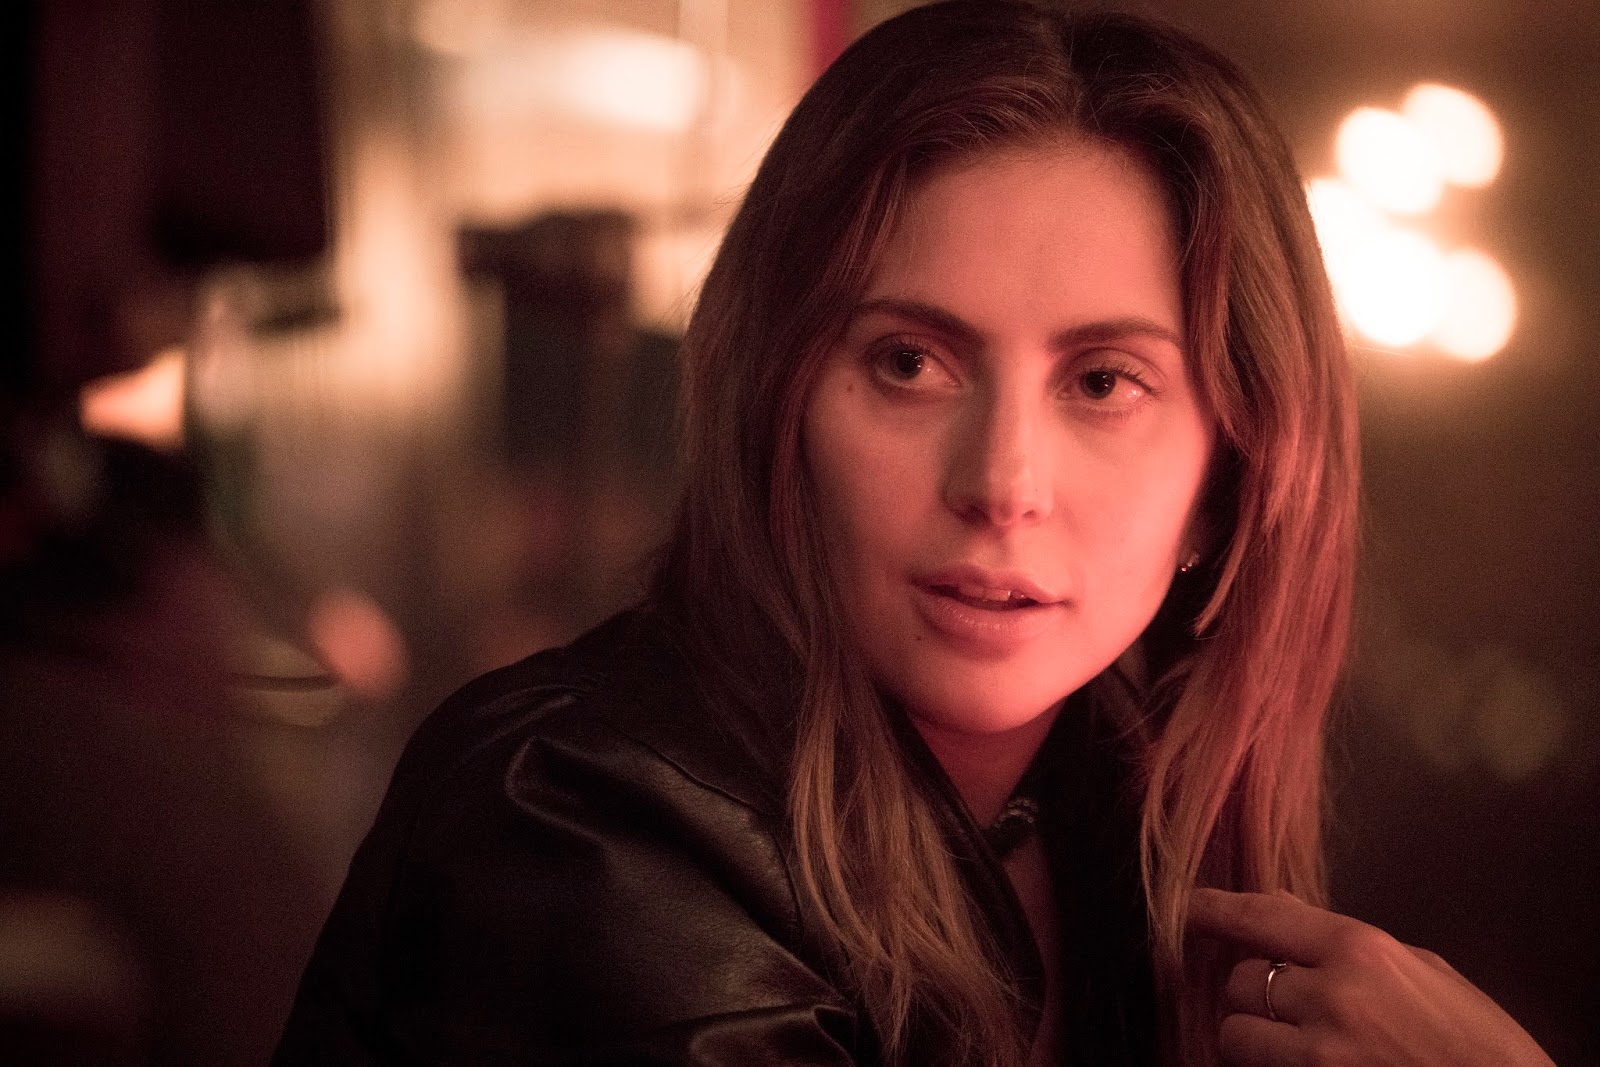 movie review a star is born lady gaga